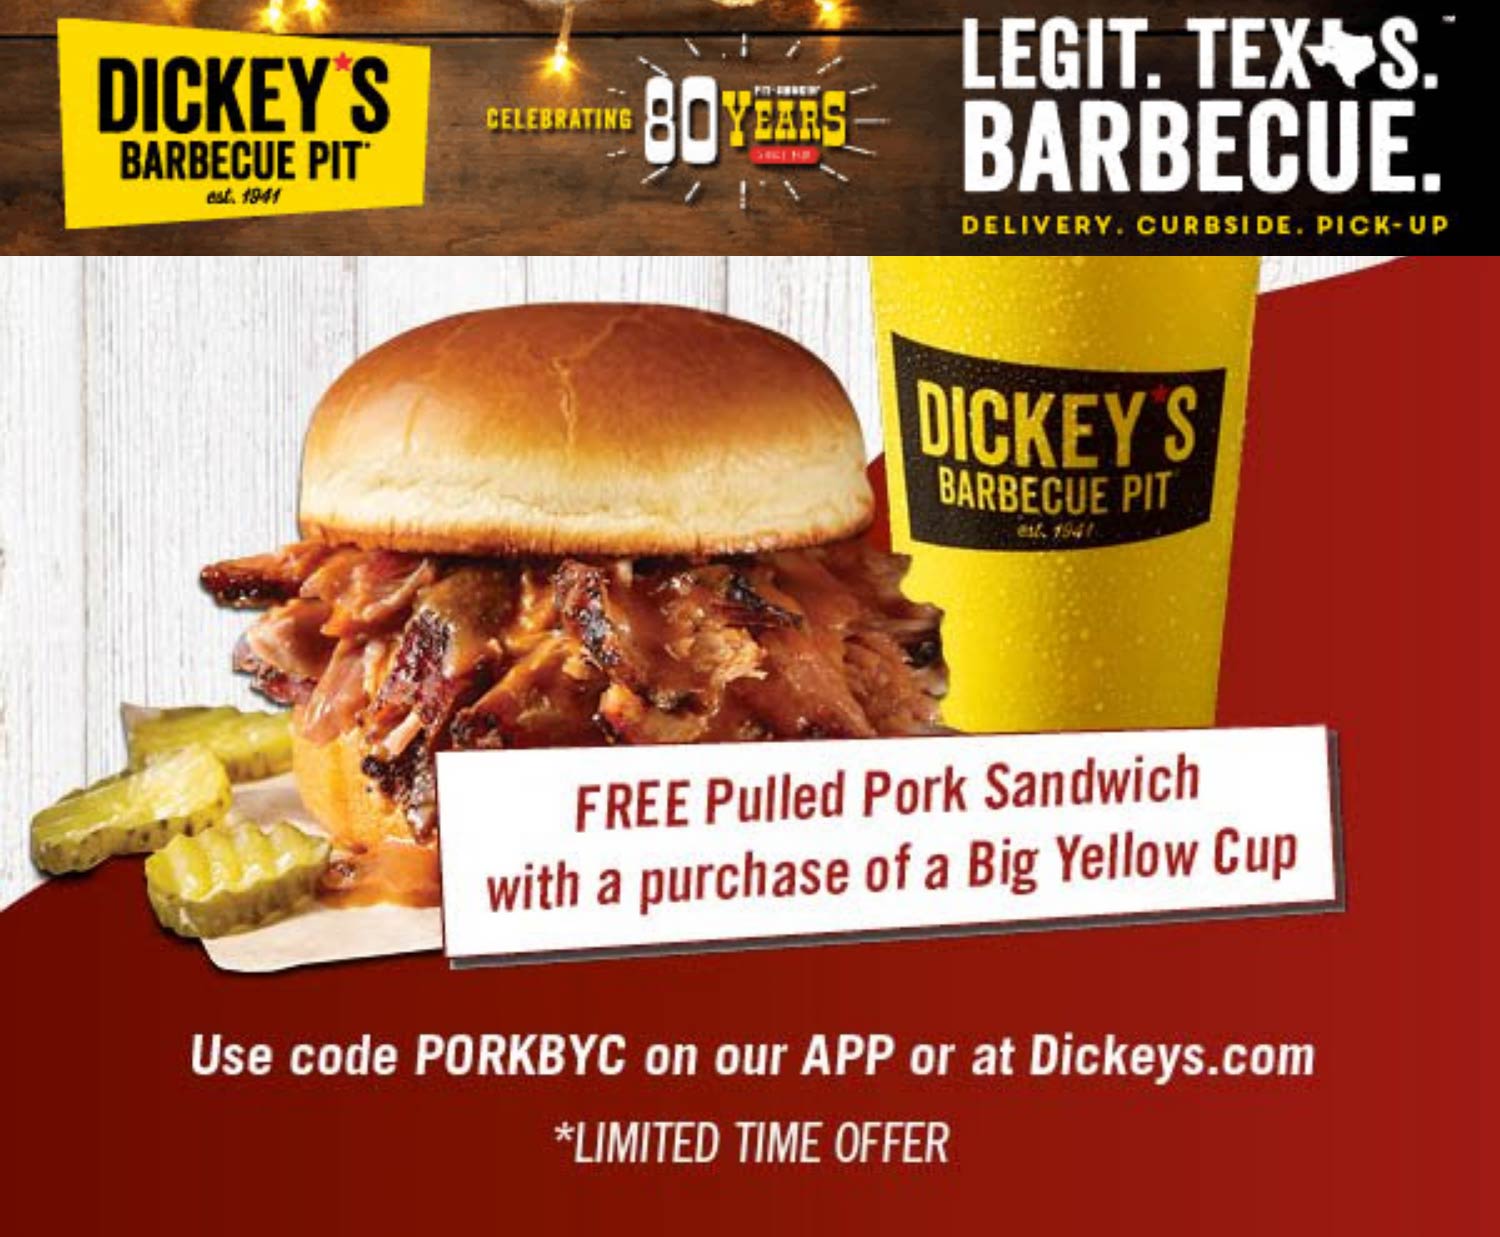 Dickeys Barbecue Pit restaurants Coupon  Free pulled pork sandwich with your drink today at Dickeys Barbecue Pit via promo code PORKBYC #dickeysbarbecuepit 